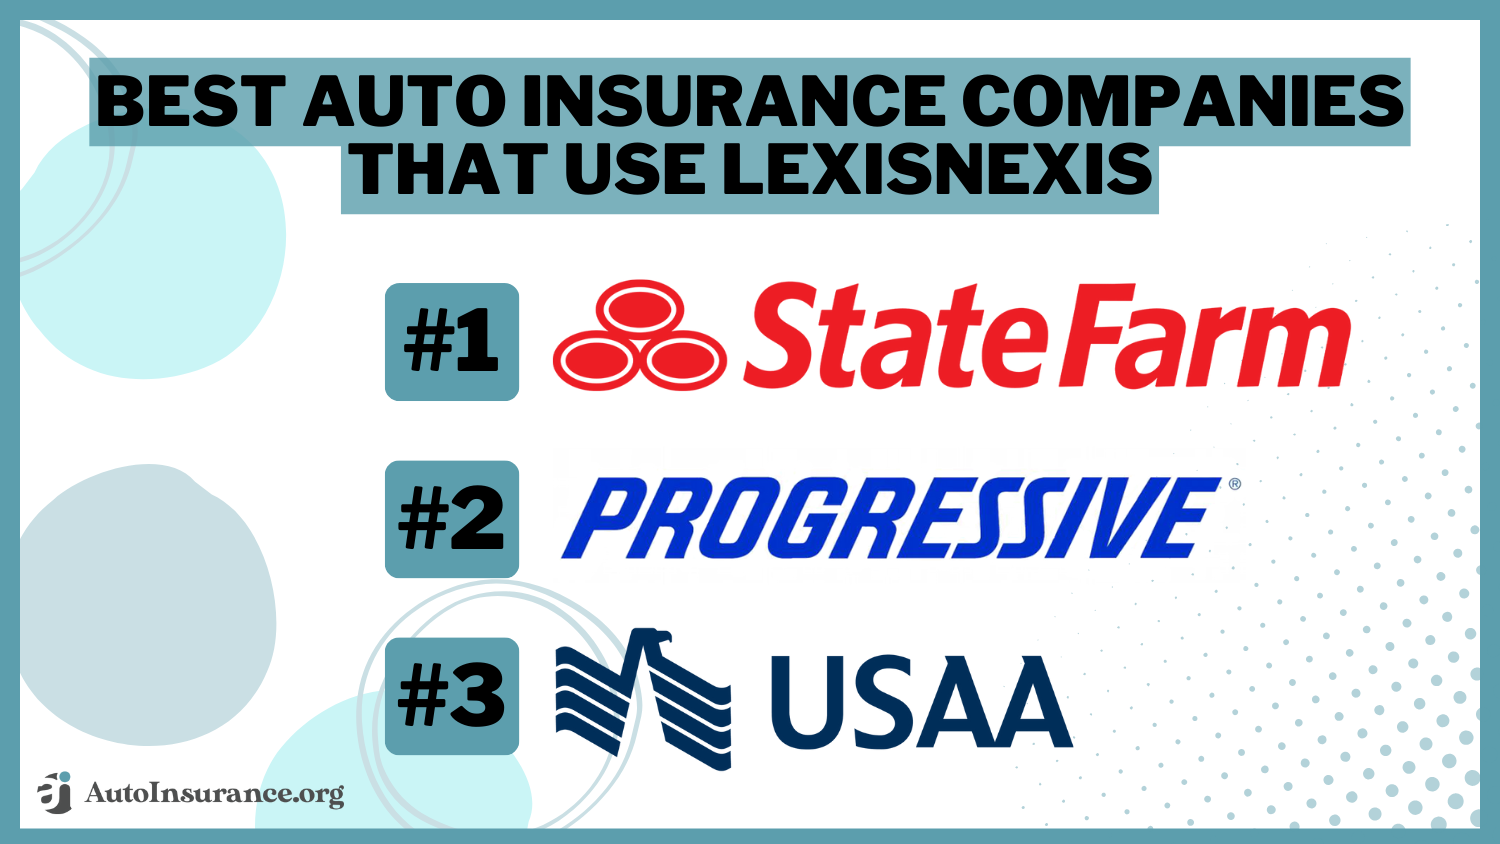 Best Auto Insurance Companies that use LexisNexis: State Farm, Progressive, and USAA